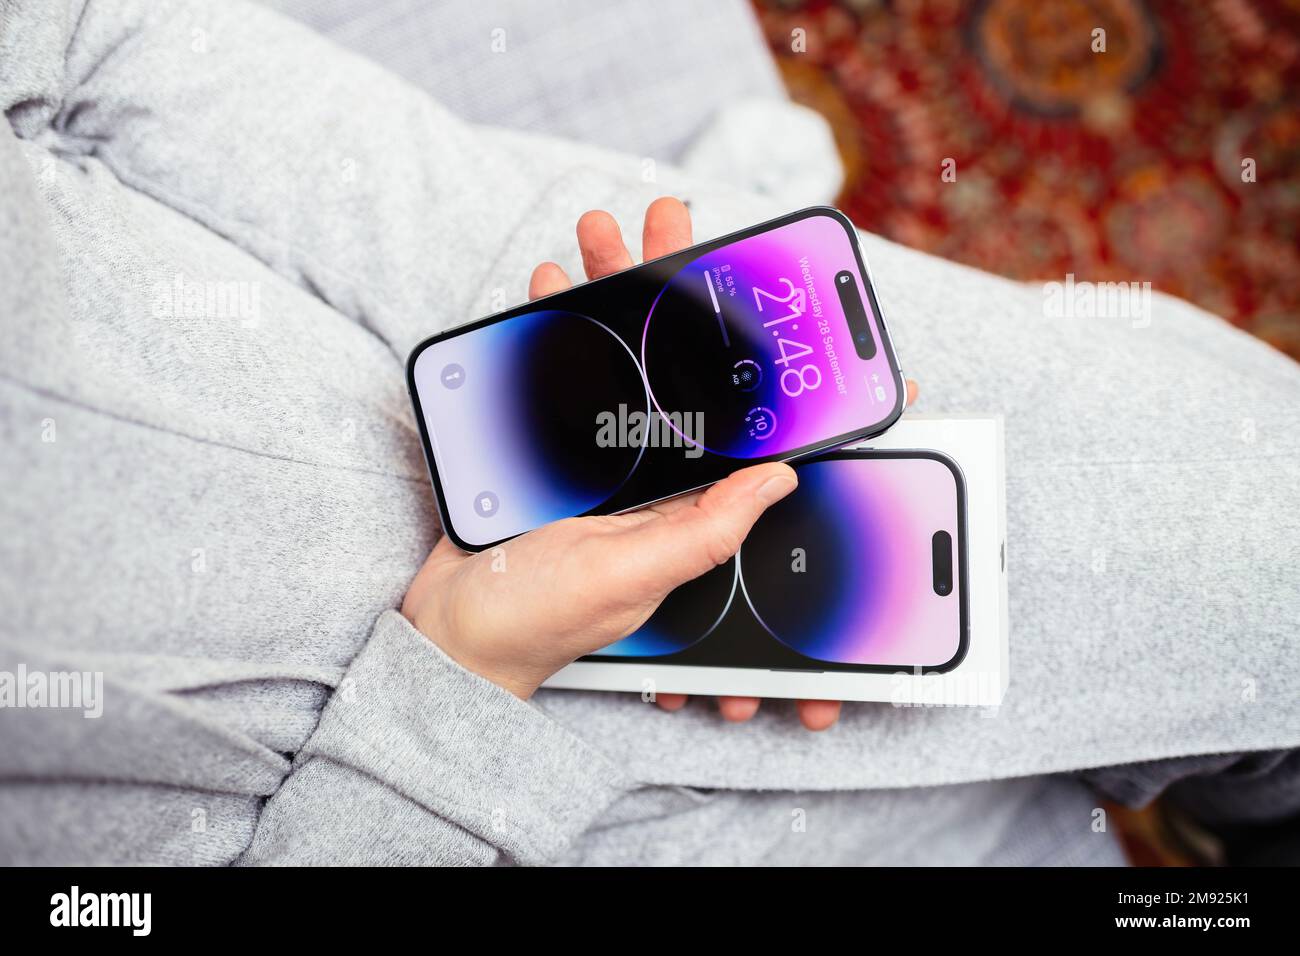 London, United Kingdom - Sep 28, 2022: POV woman hand holding the package showing new Deep Purple Apple iPhone 14 Pro Max the sixteenth-generation flagship iPhones with no SIM cards and Dynamic Island feature always on display Stock Photo